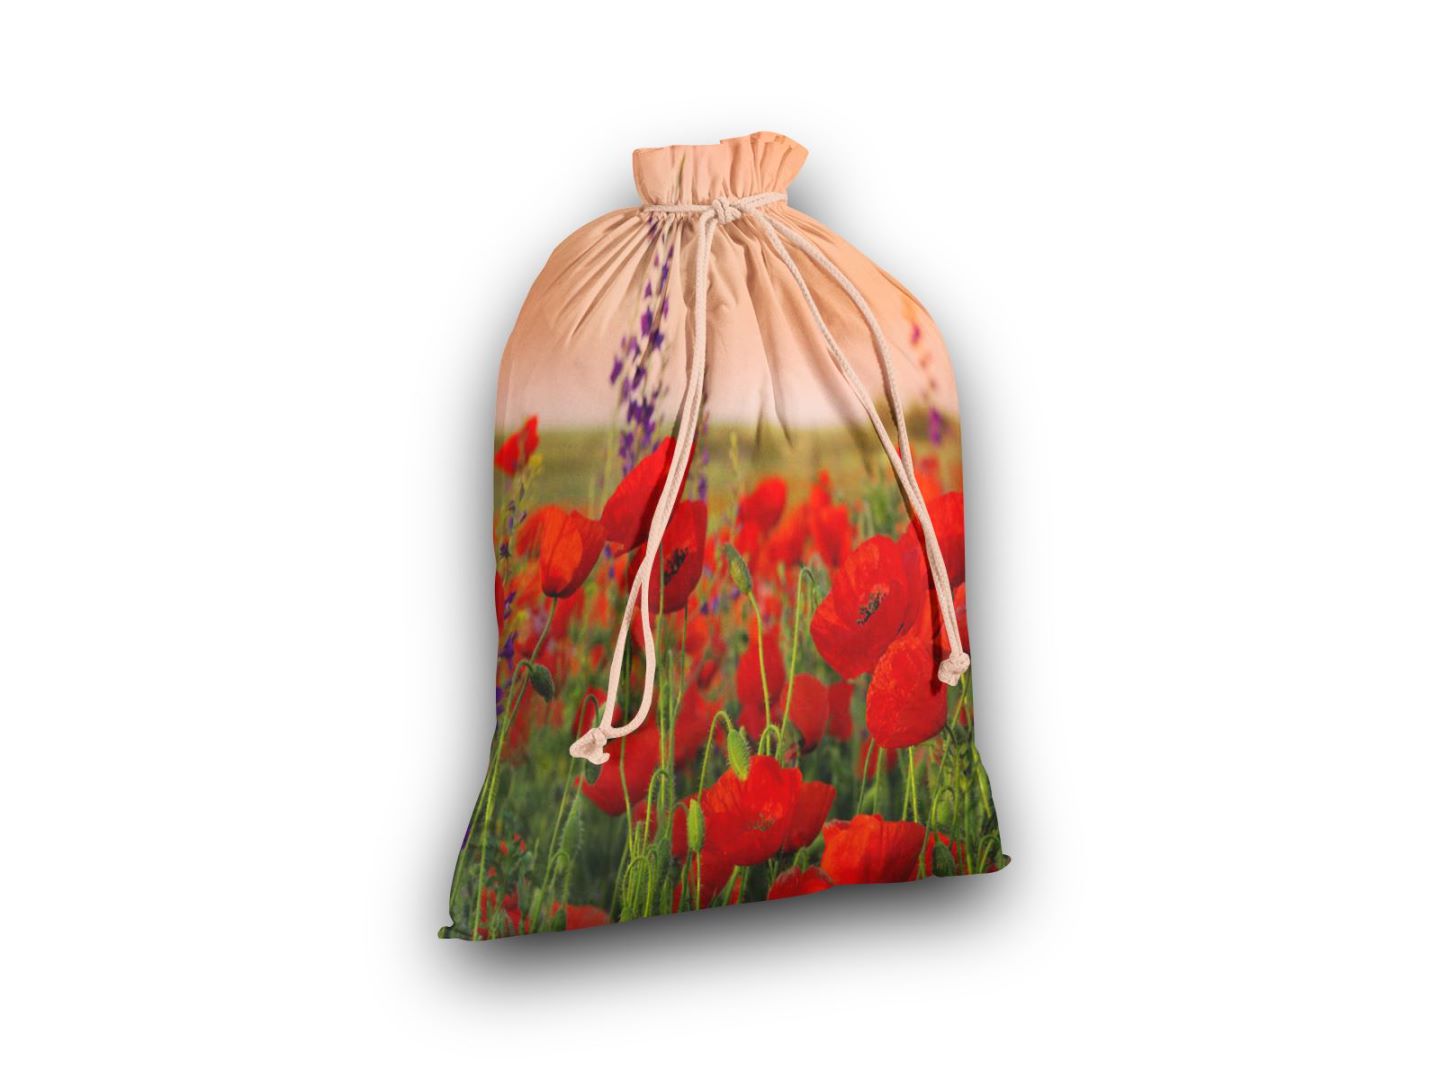 TB002 Cotton Drawstring Digital Printed Storage Bags for Household Products